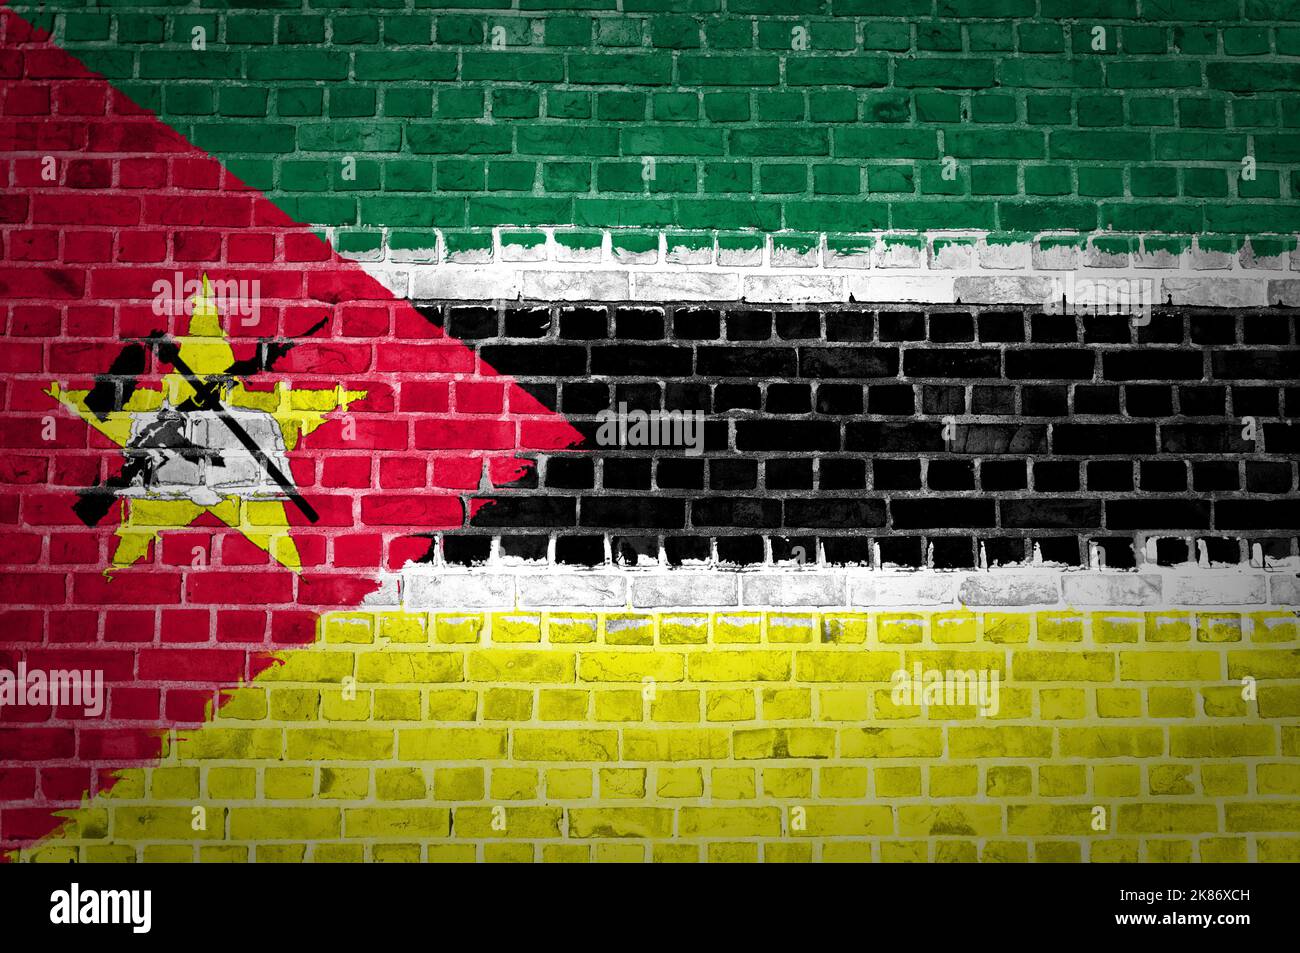 An image of the Mozambique flag painted on a brick wall in an urban location Stock Photo